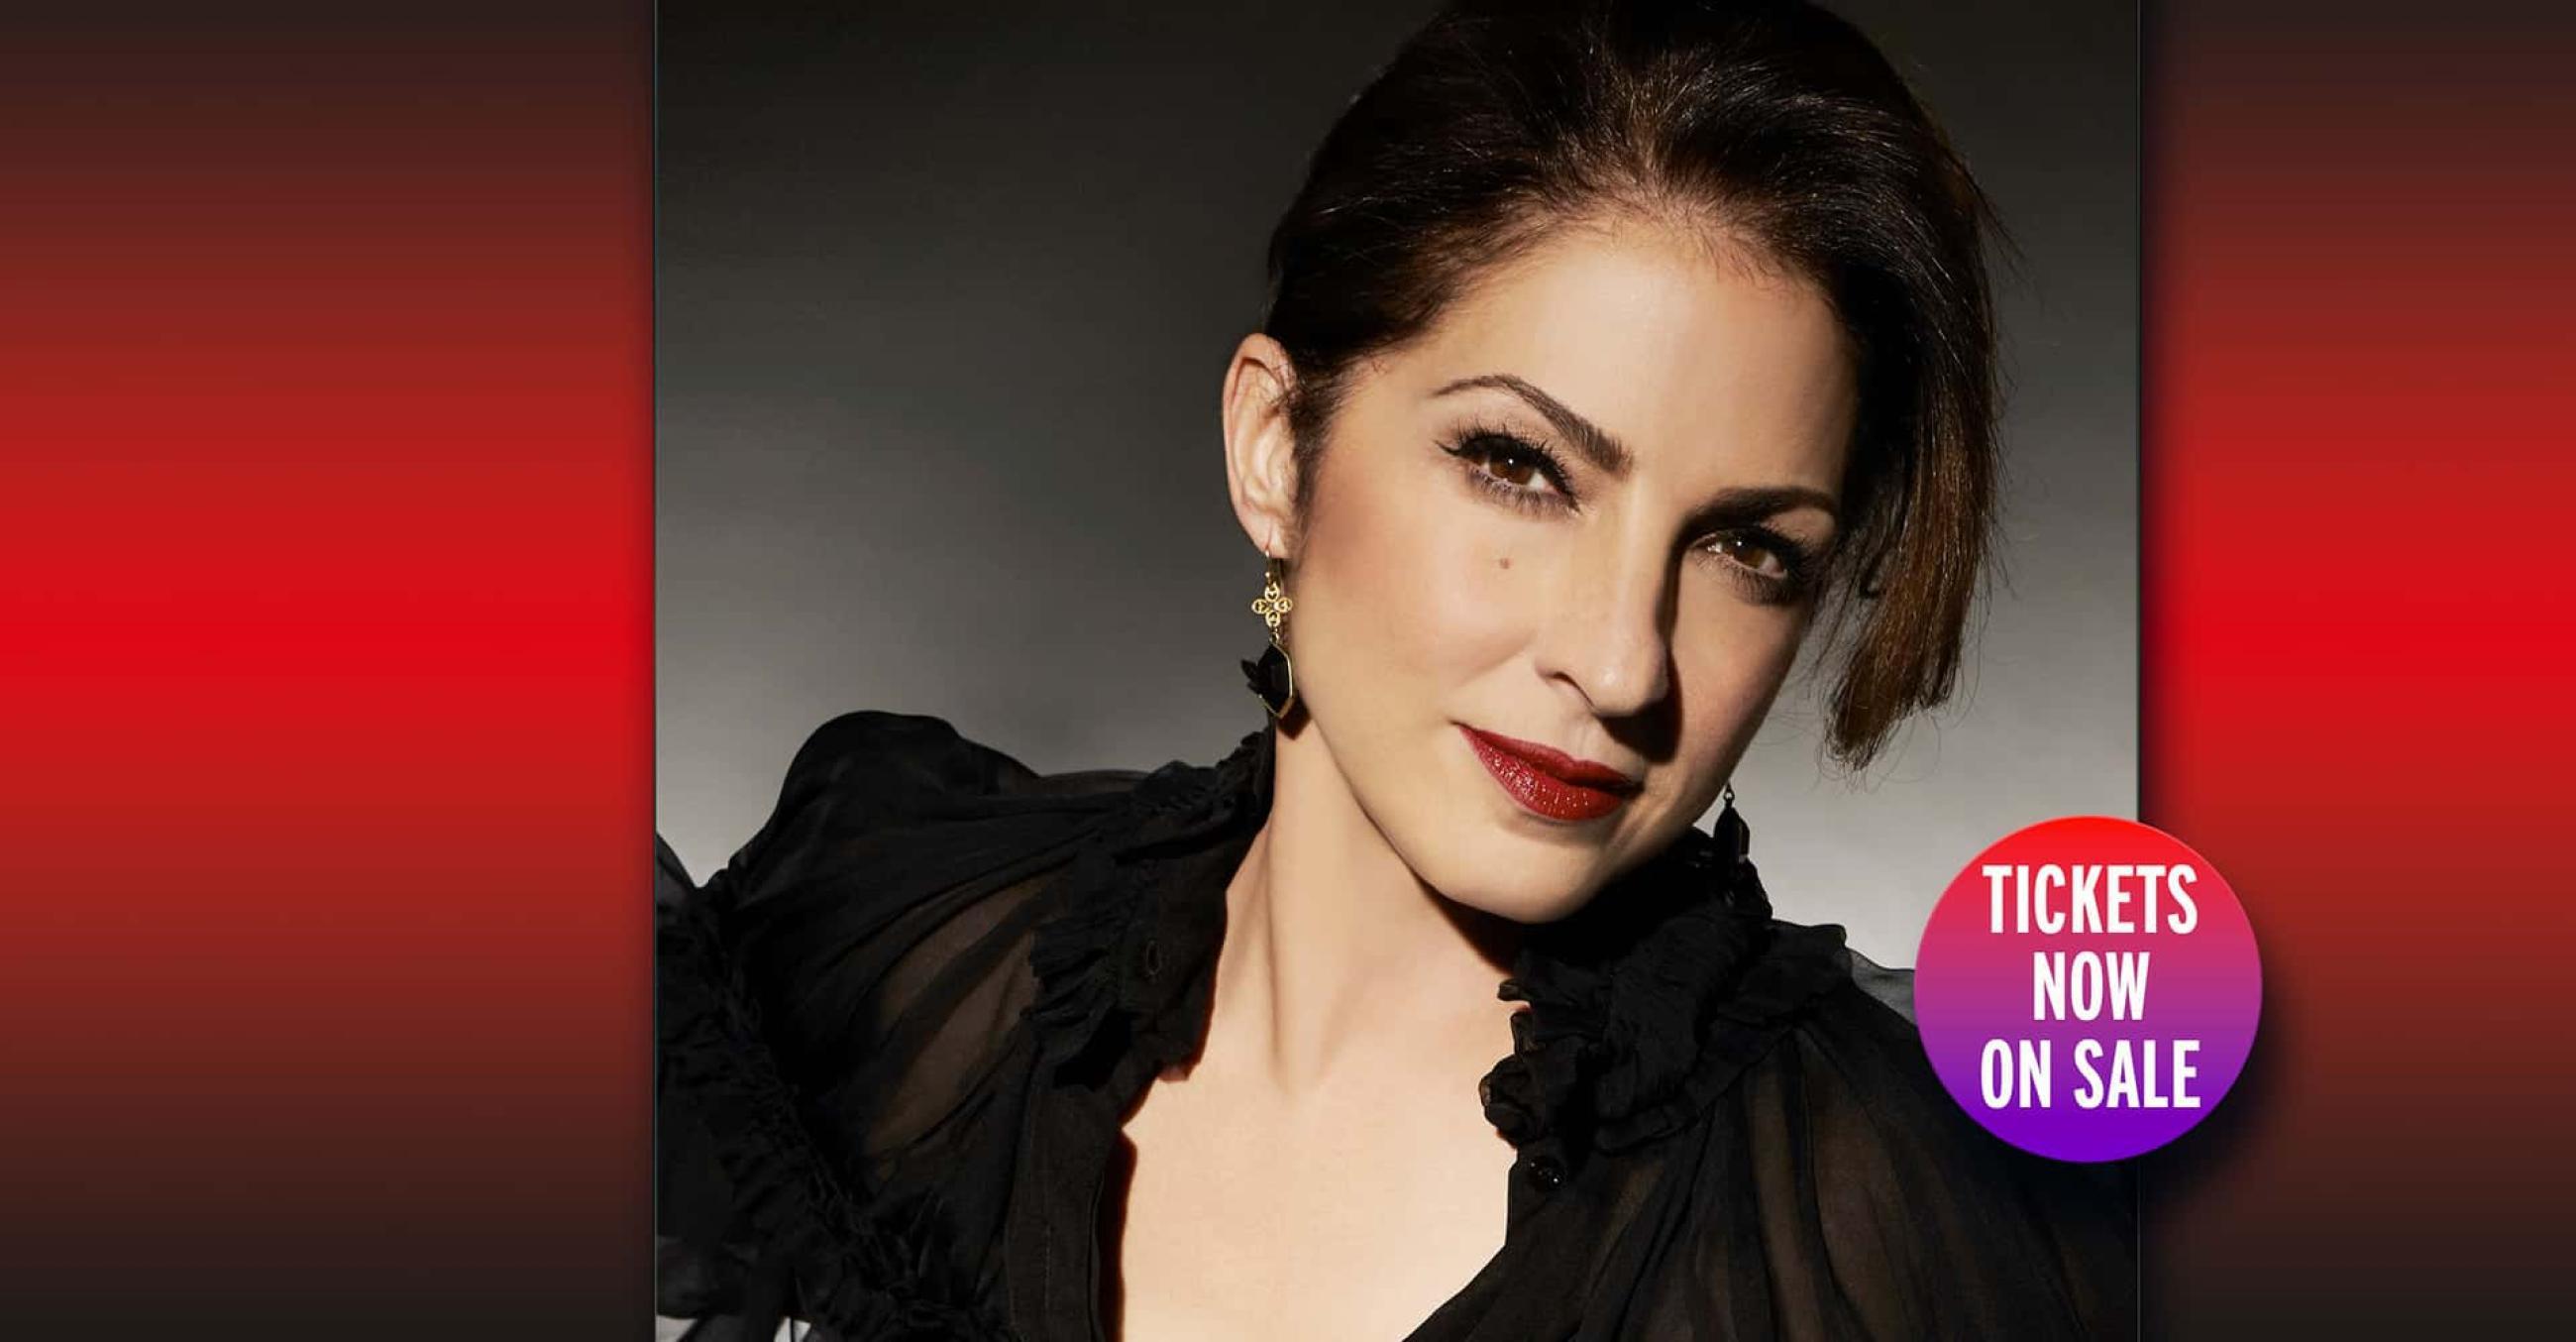 Gloria Estefan, with "tickets now on sale" button